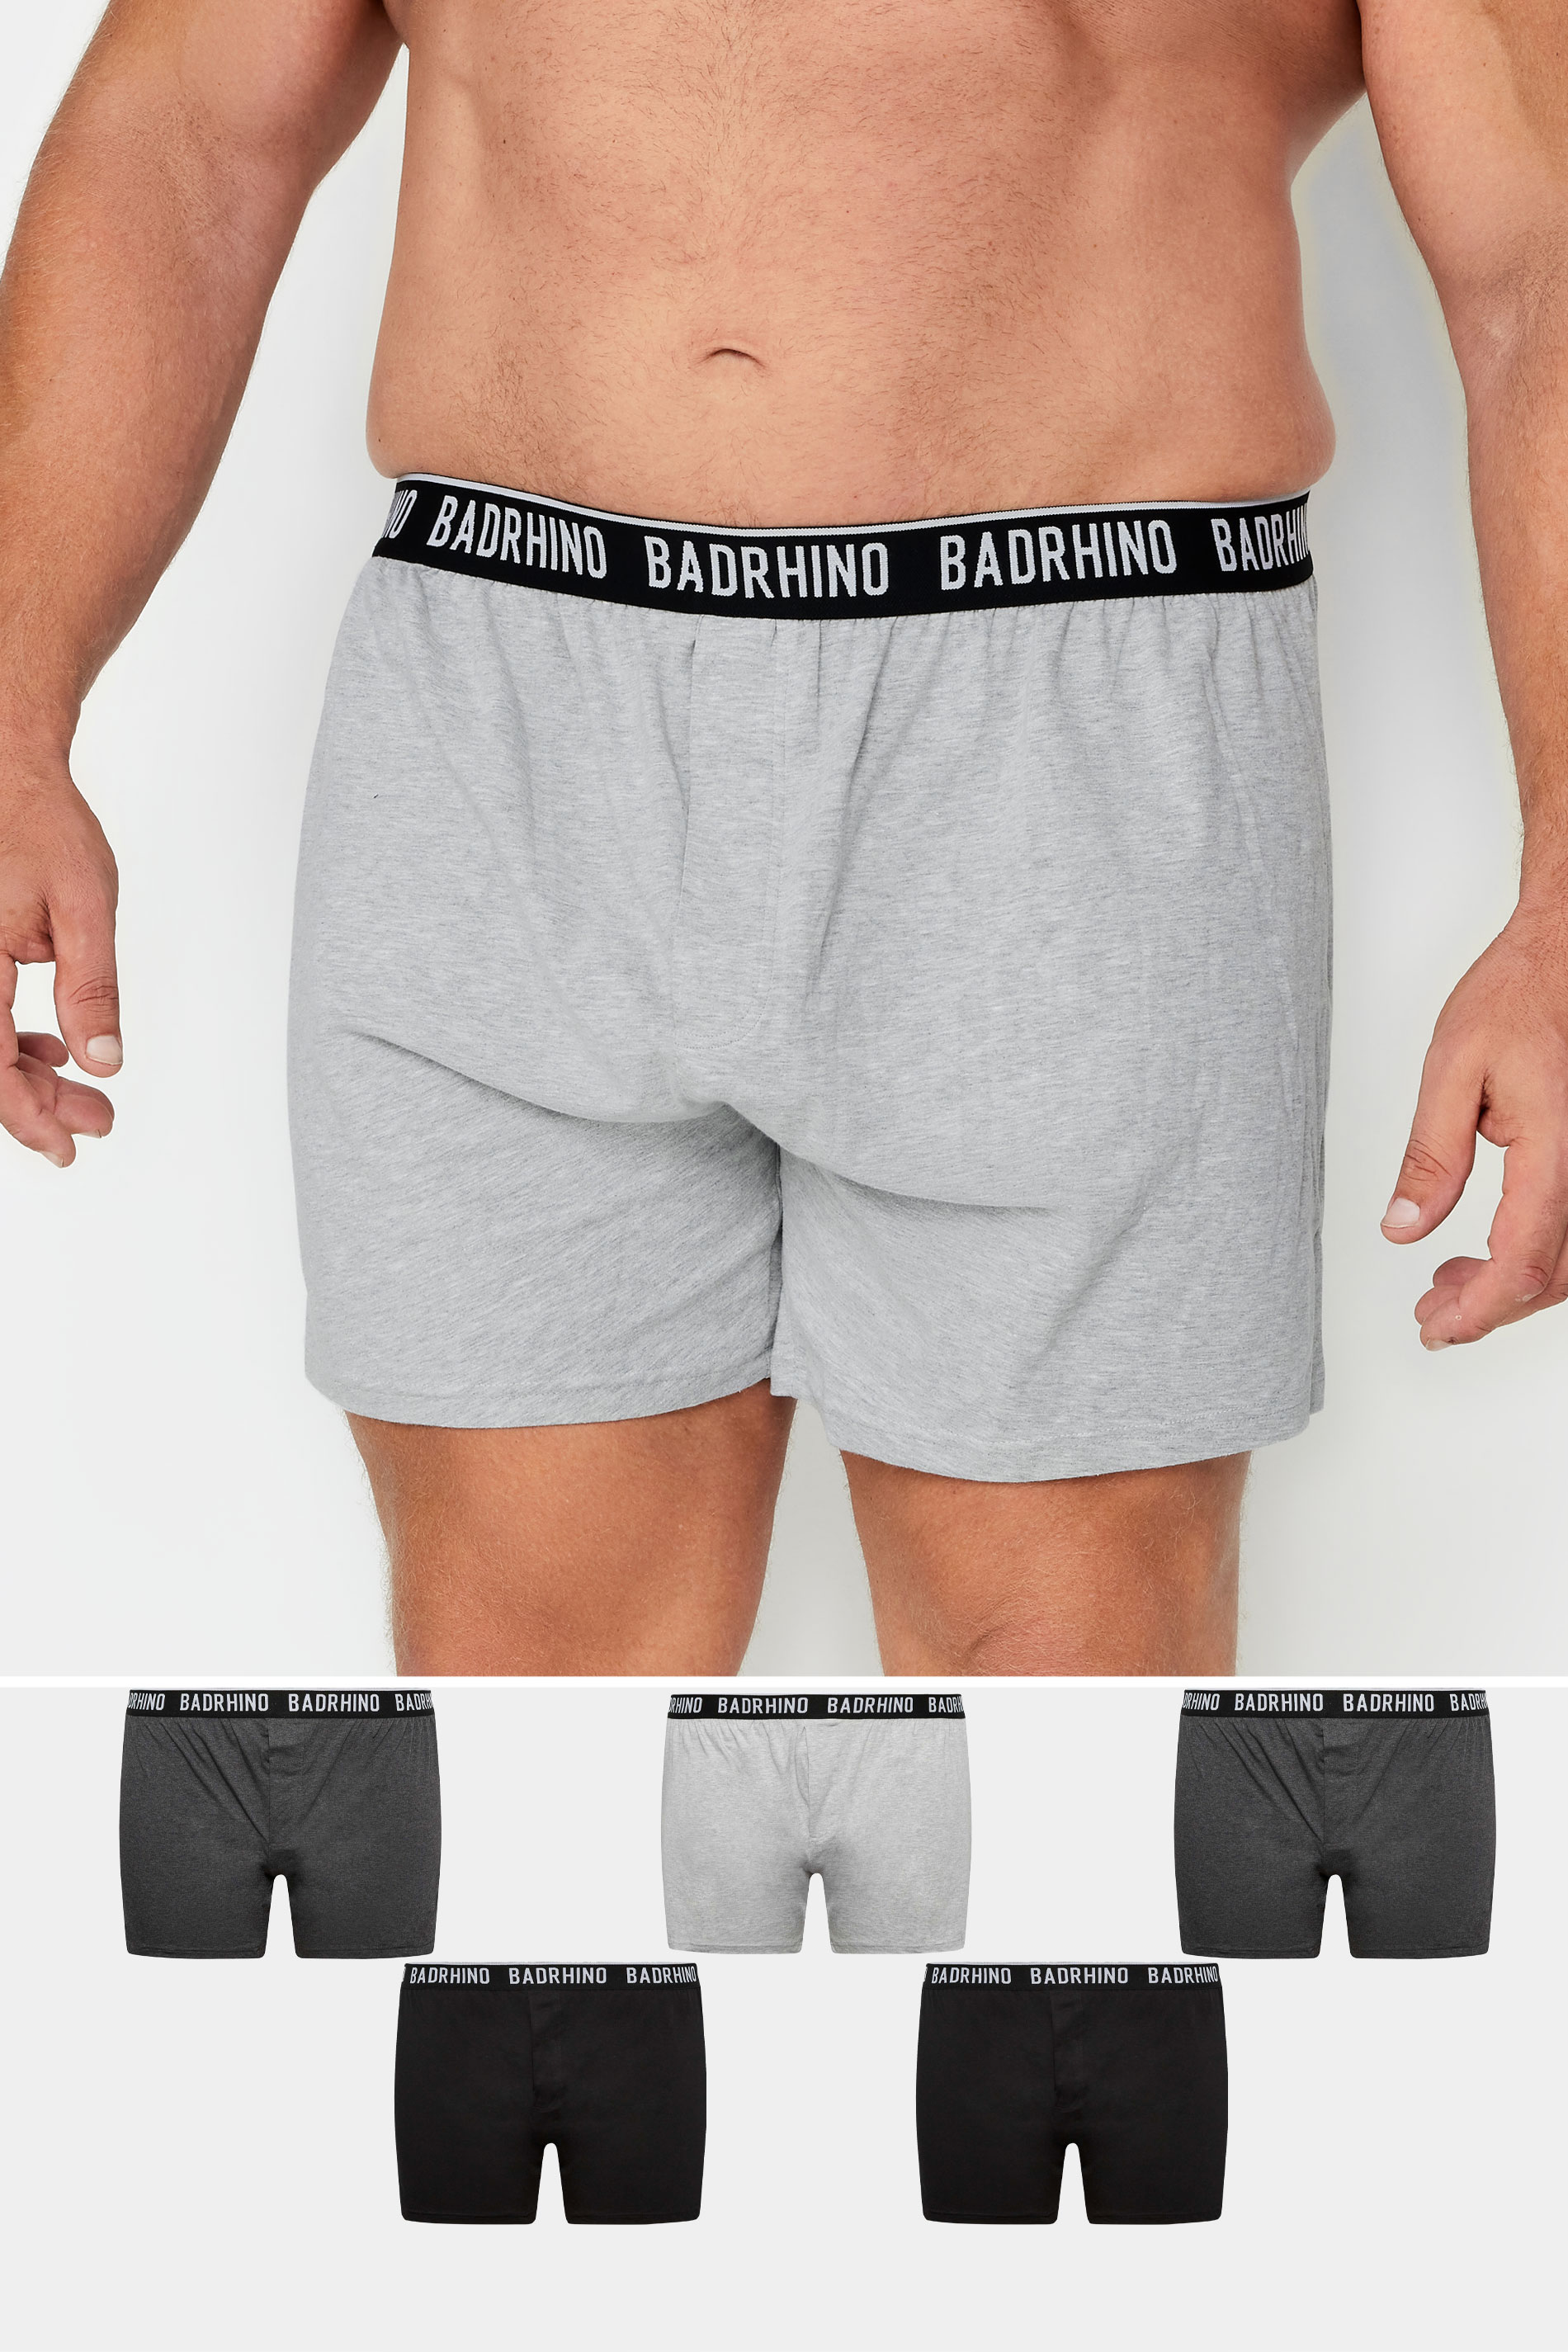 BadRhino Big & Tall 5 PACK Black & Grey Button Up Loose Fit Boxers | BadRhino 1